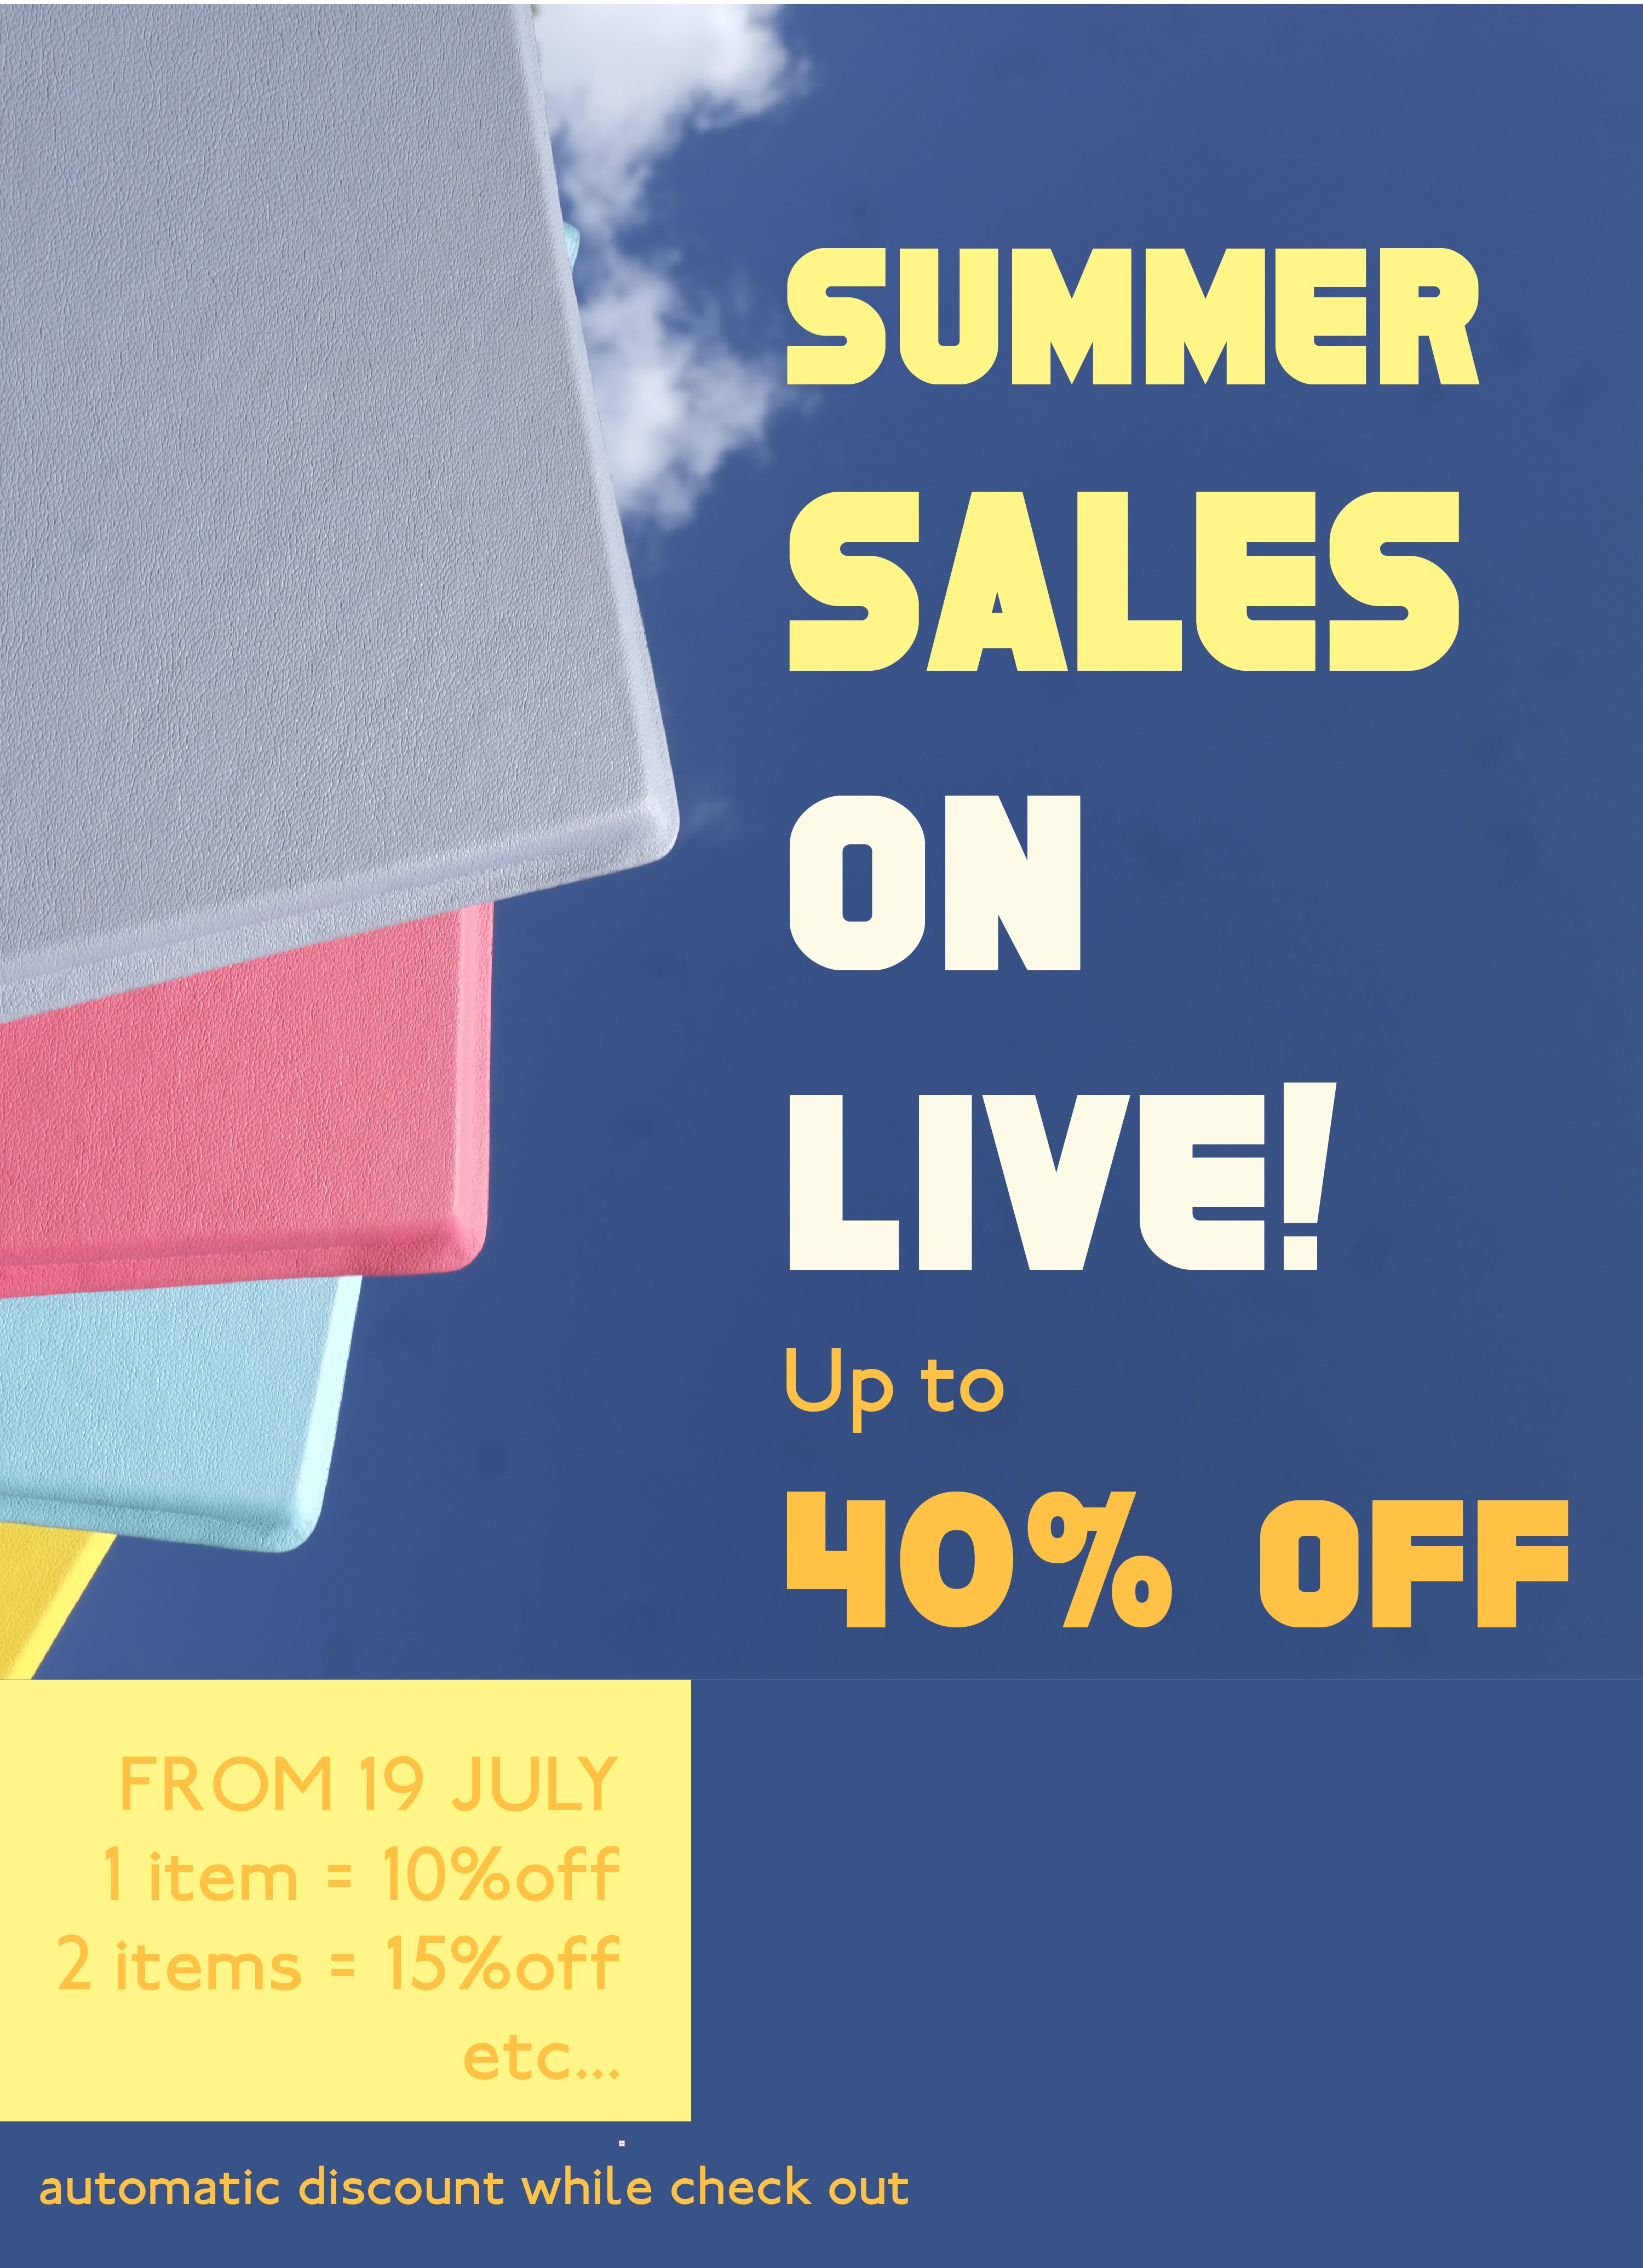 SUMMER SALE now on live! ☀️